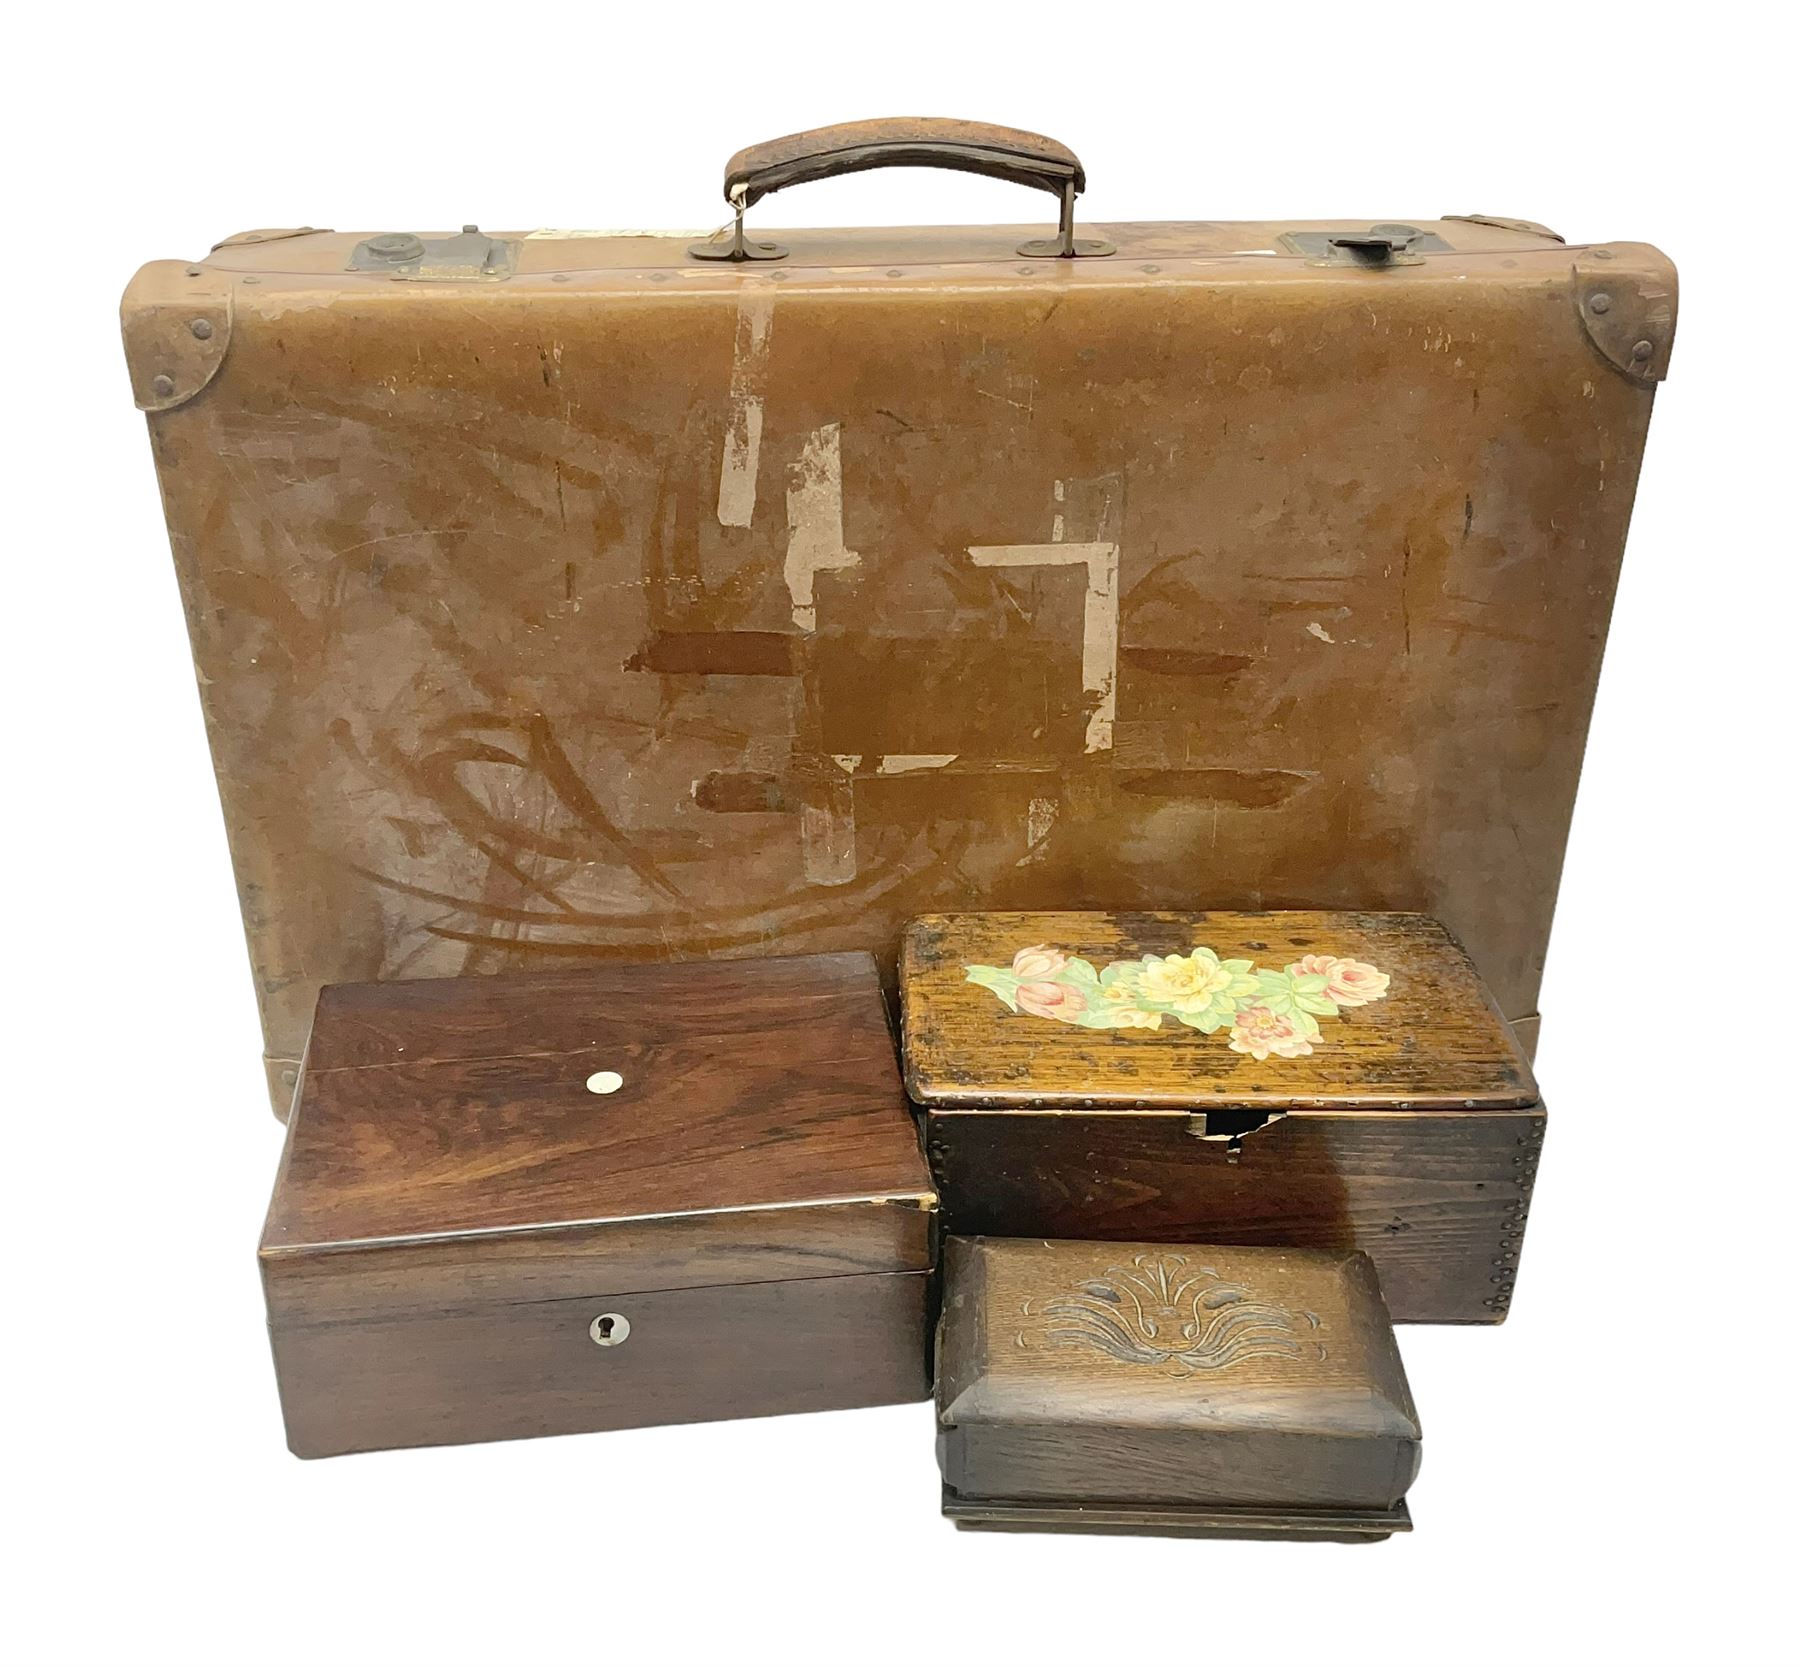 Leather suitcase together with three wooden boxes